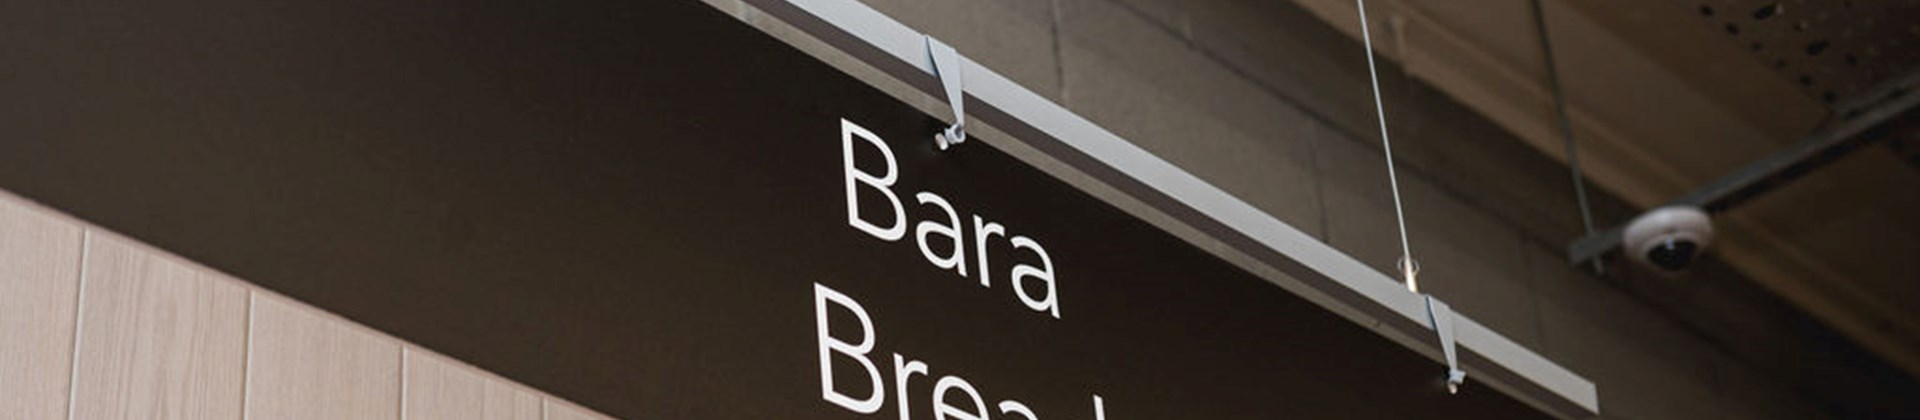 Photo of bread sign